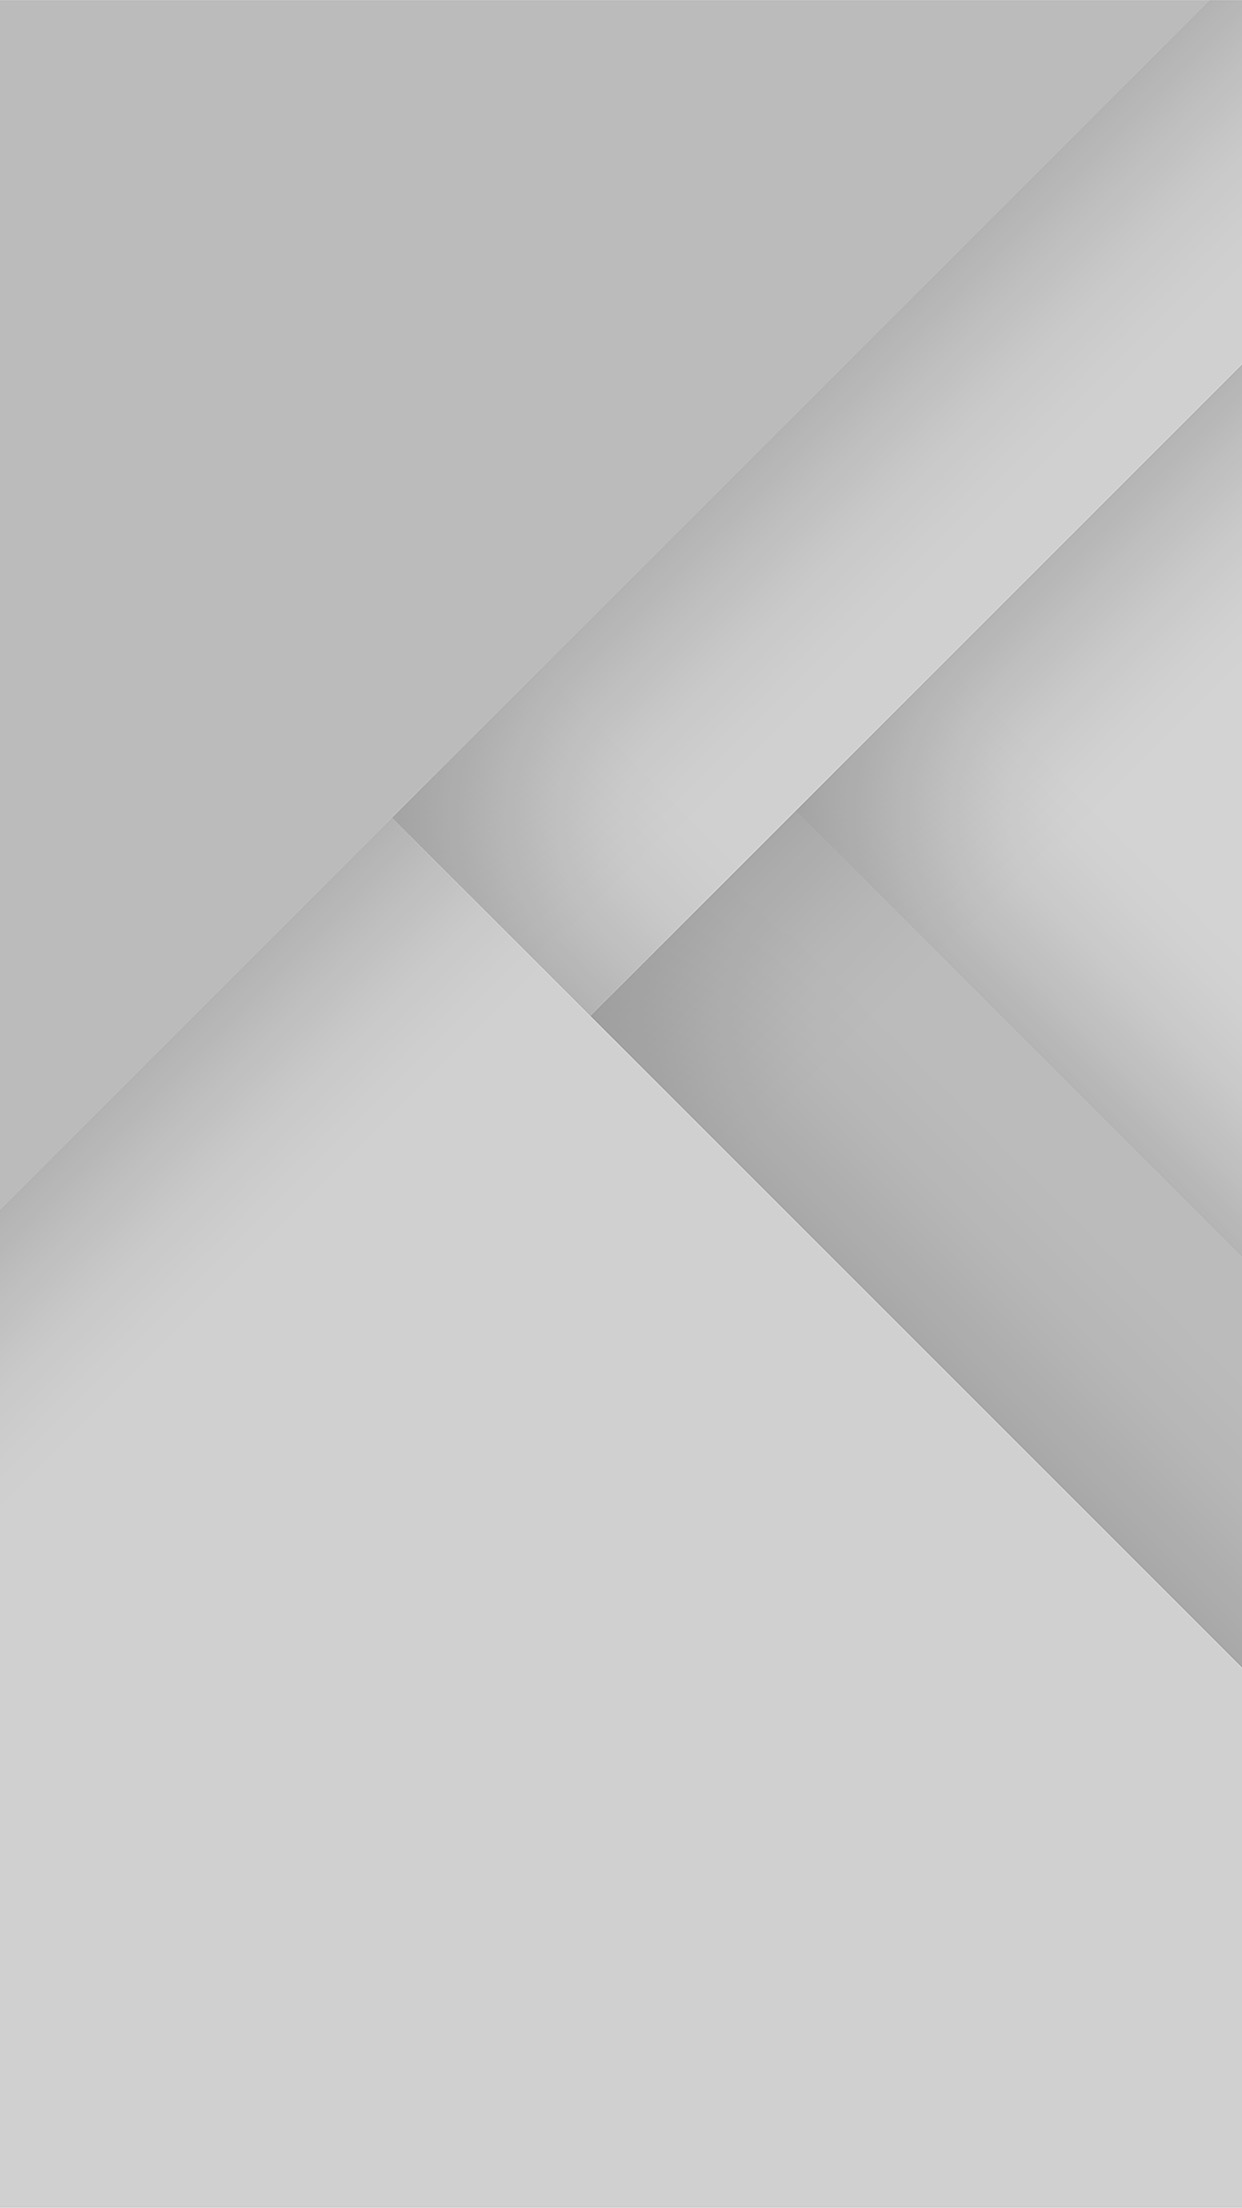 Android Lollipop Material Design White Pattern Android - Iphone 6 Light Grey  - 1242x2208 Wallpaper 